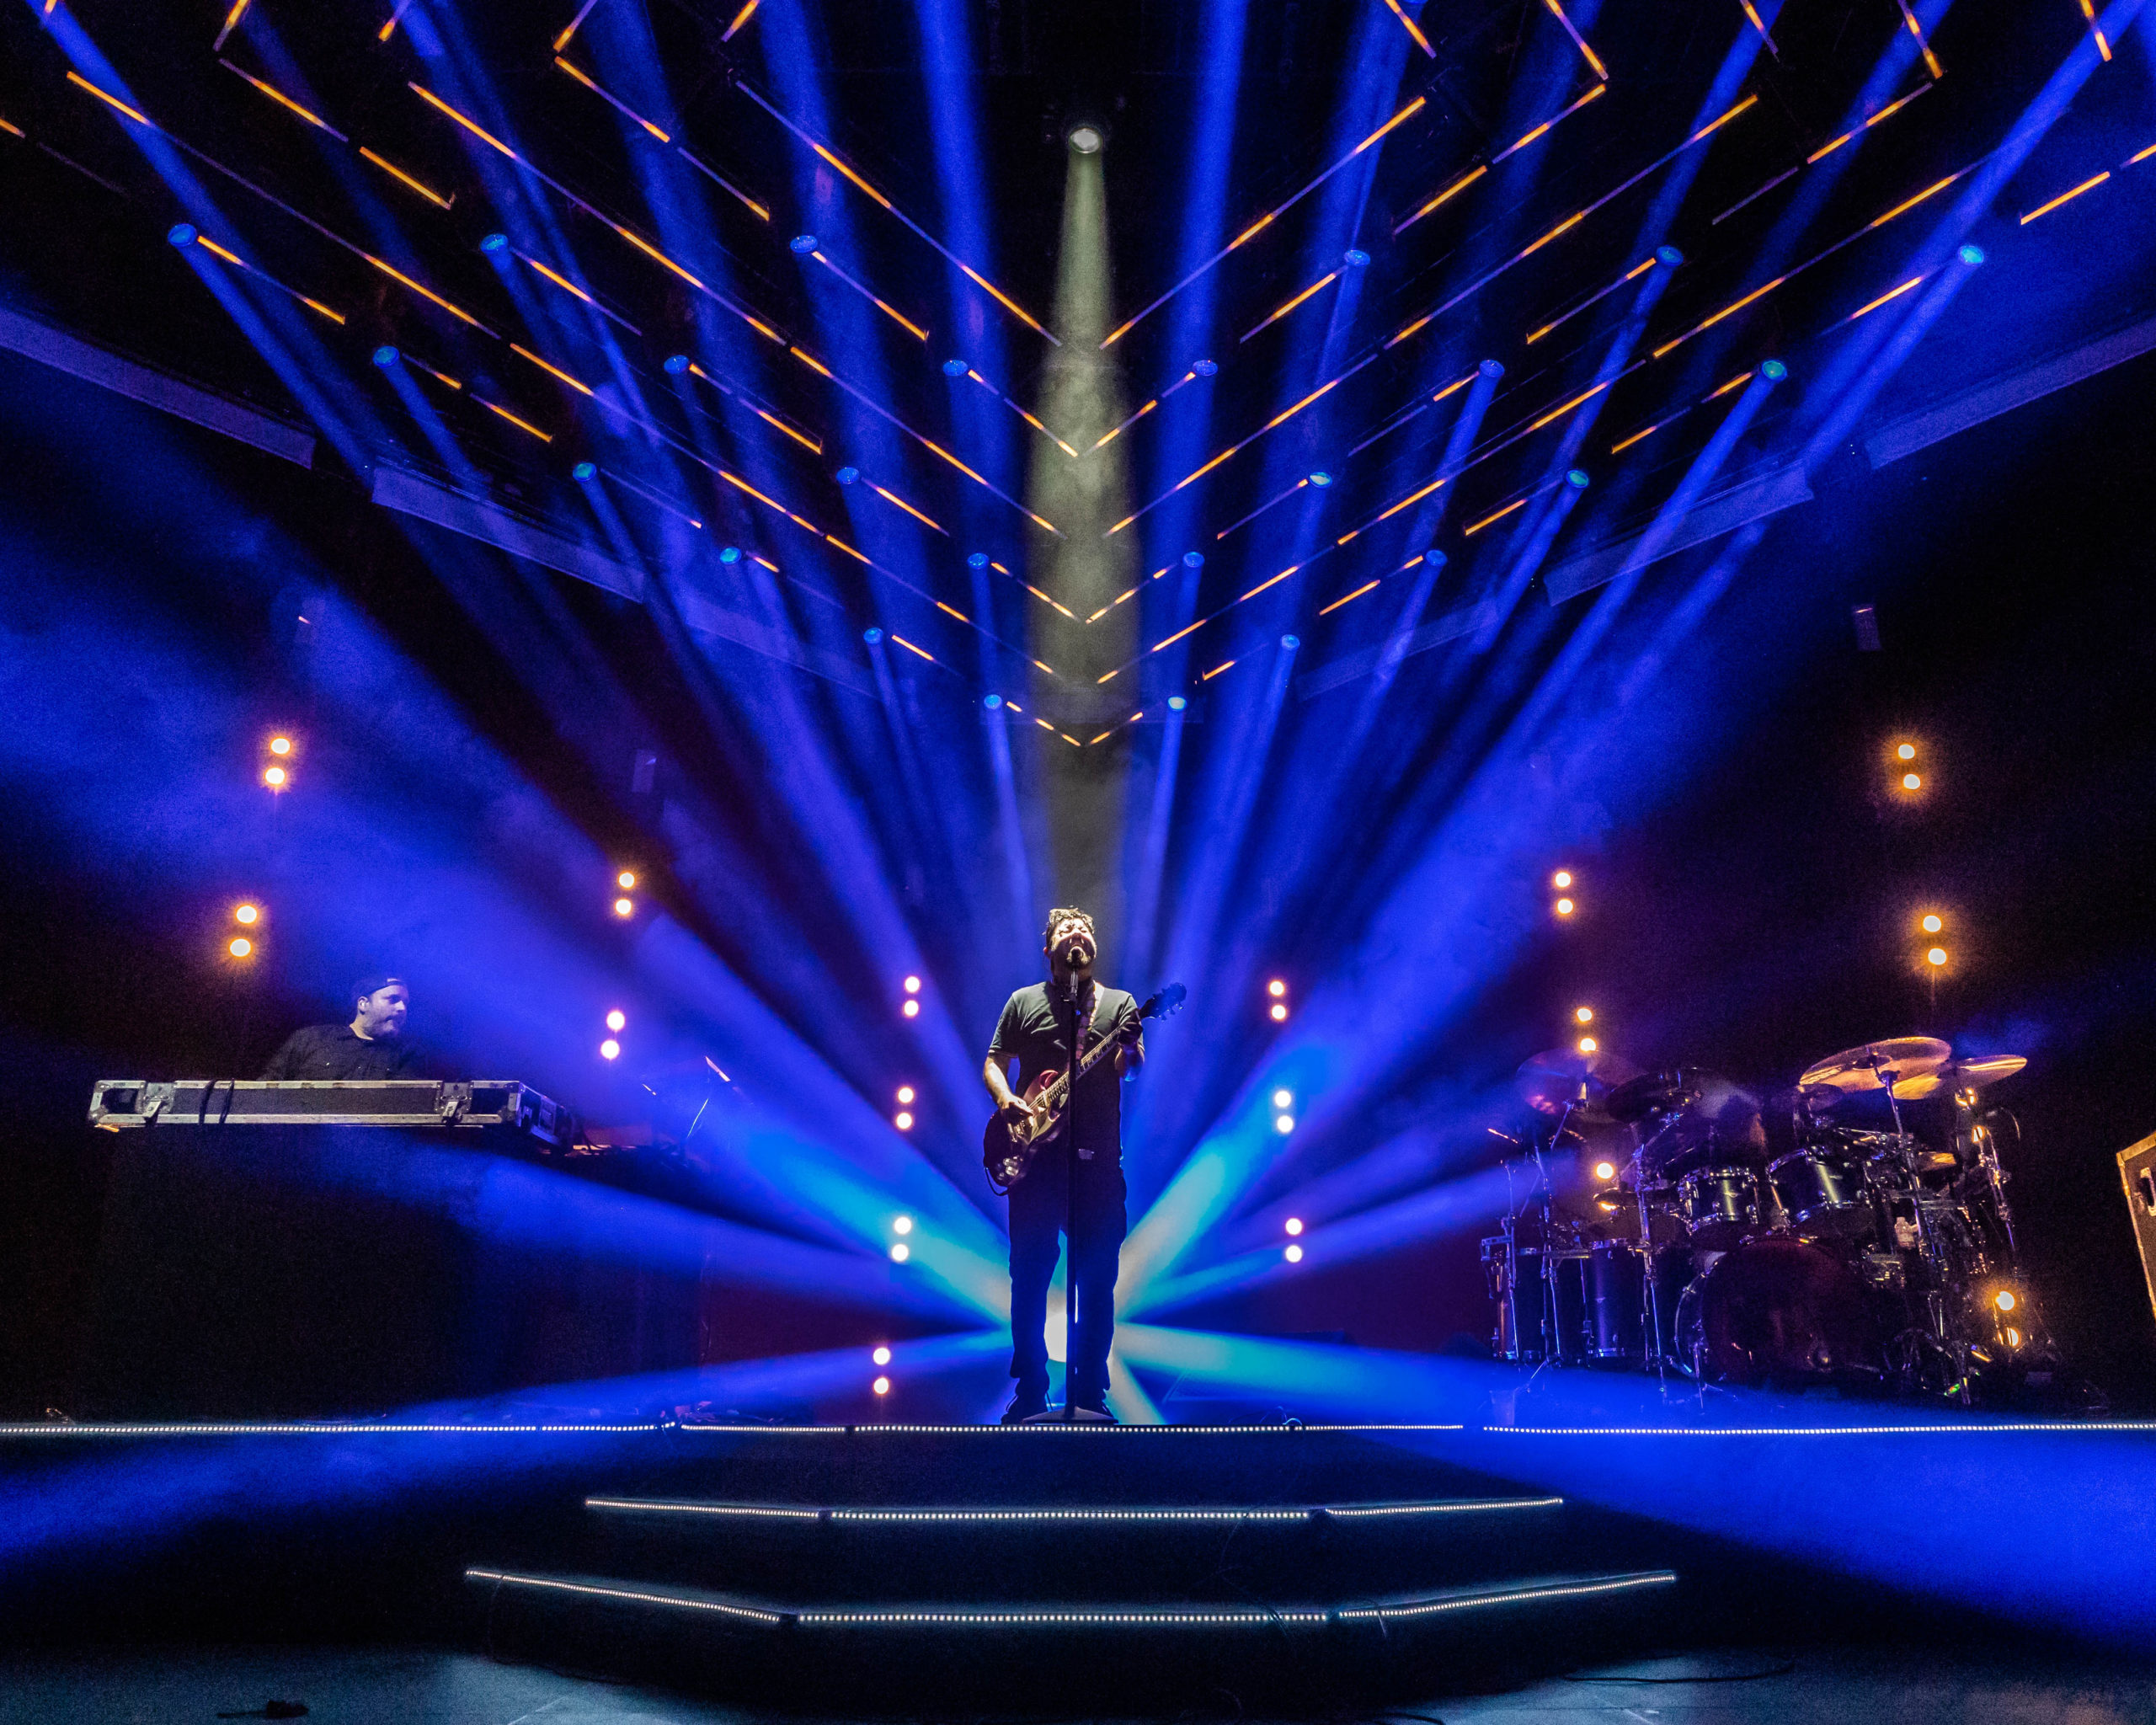 Deftones Tour US and Europe with GLP JDC1 and Scenex Lighting LED Pixel